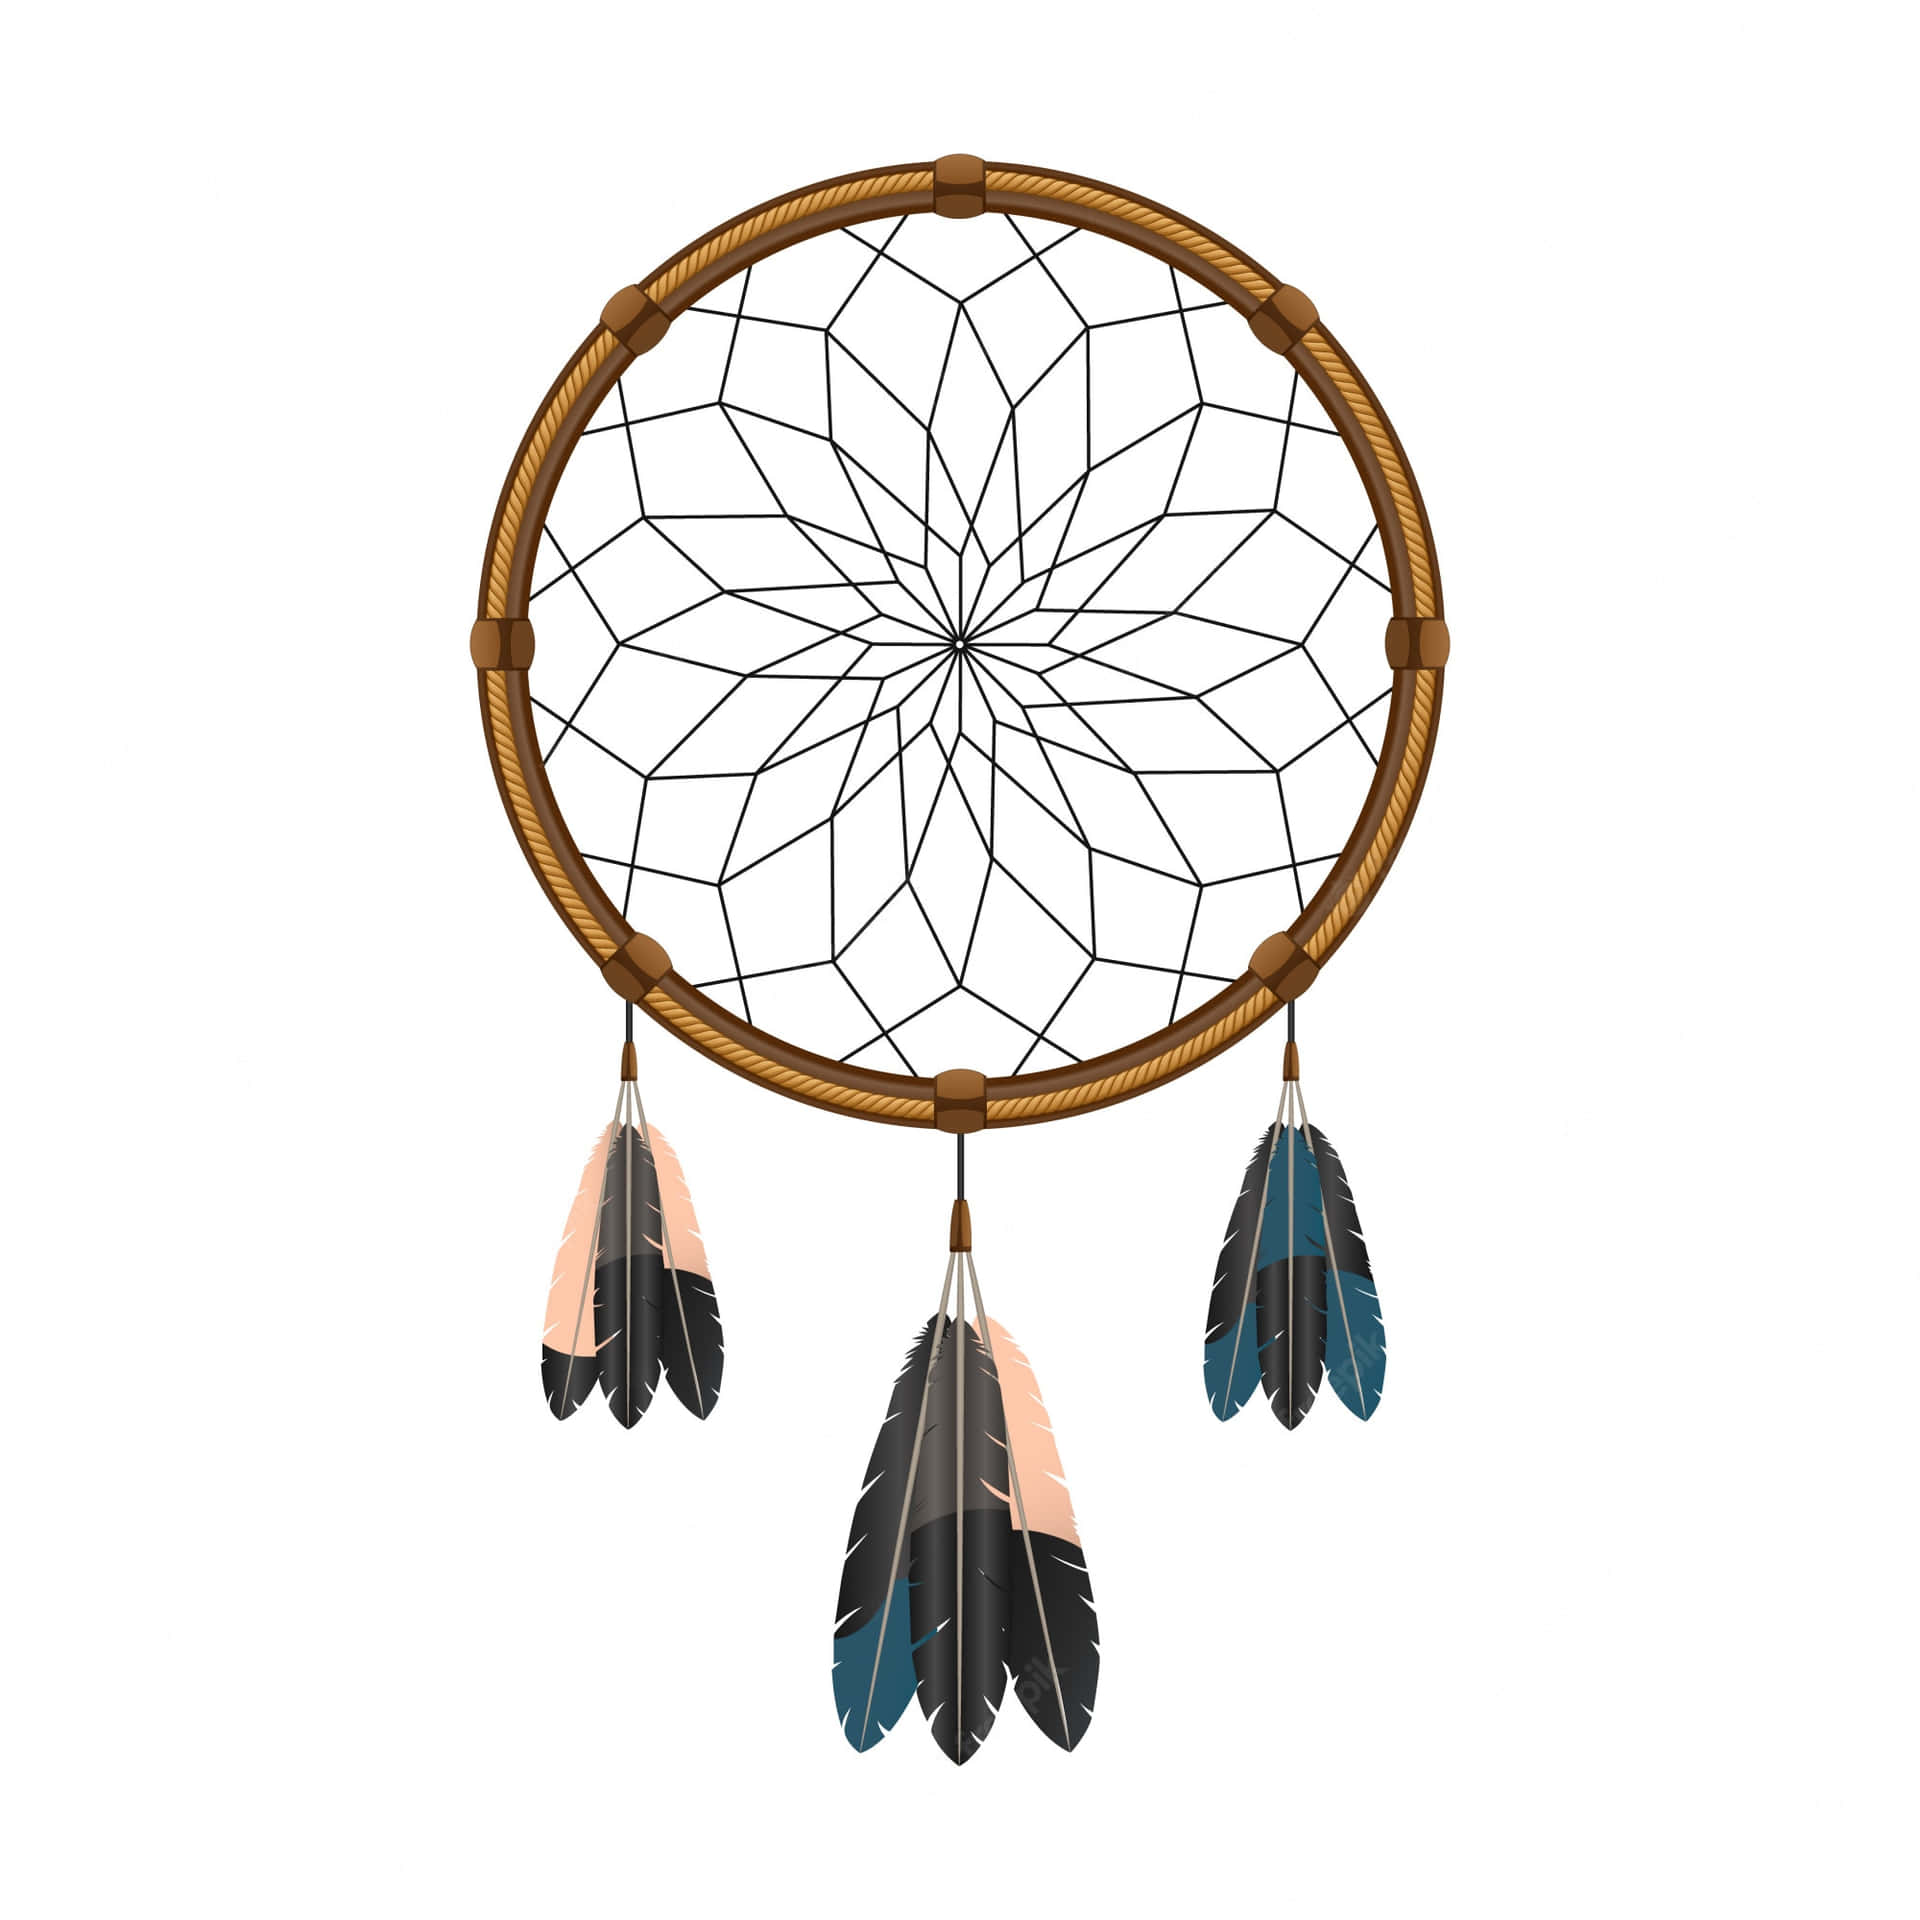 A Dream Catcher With Feathers On A White Background